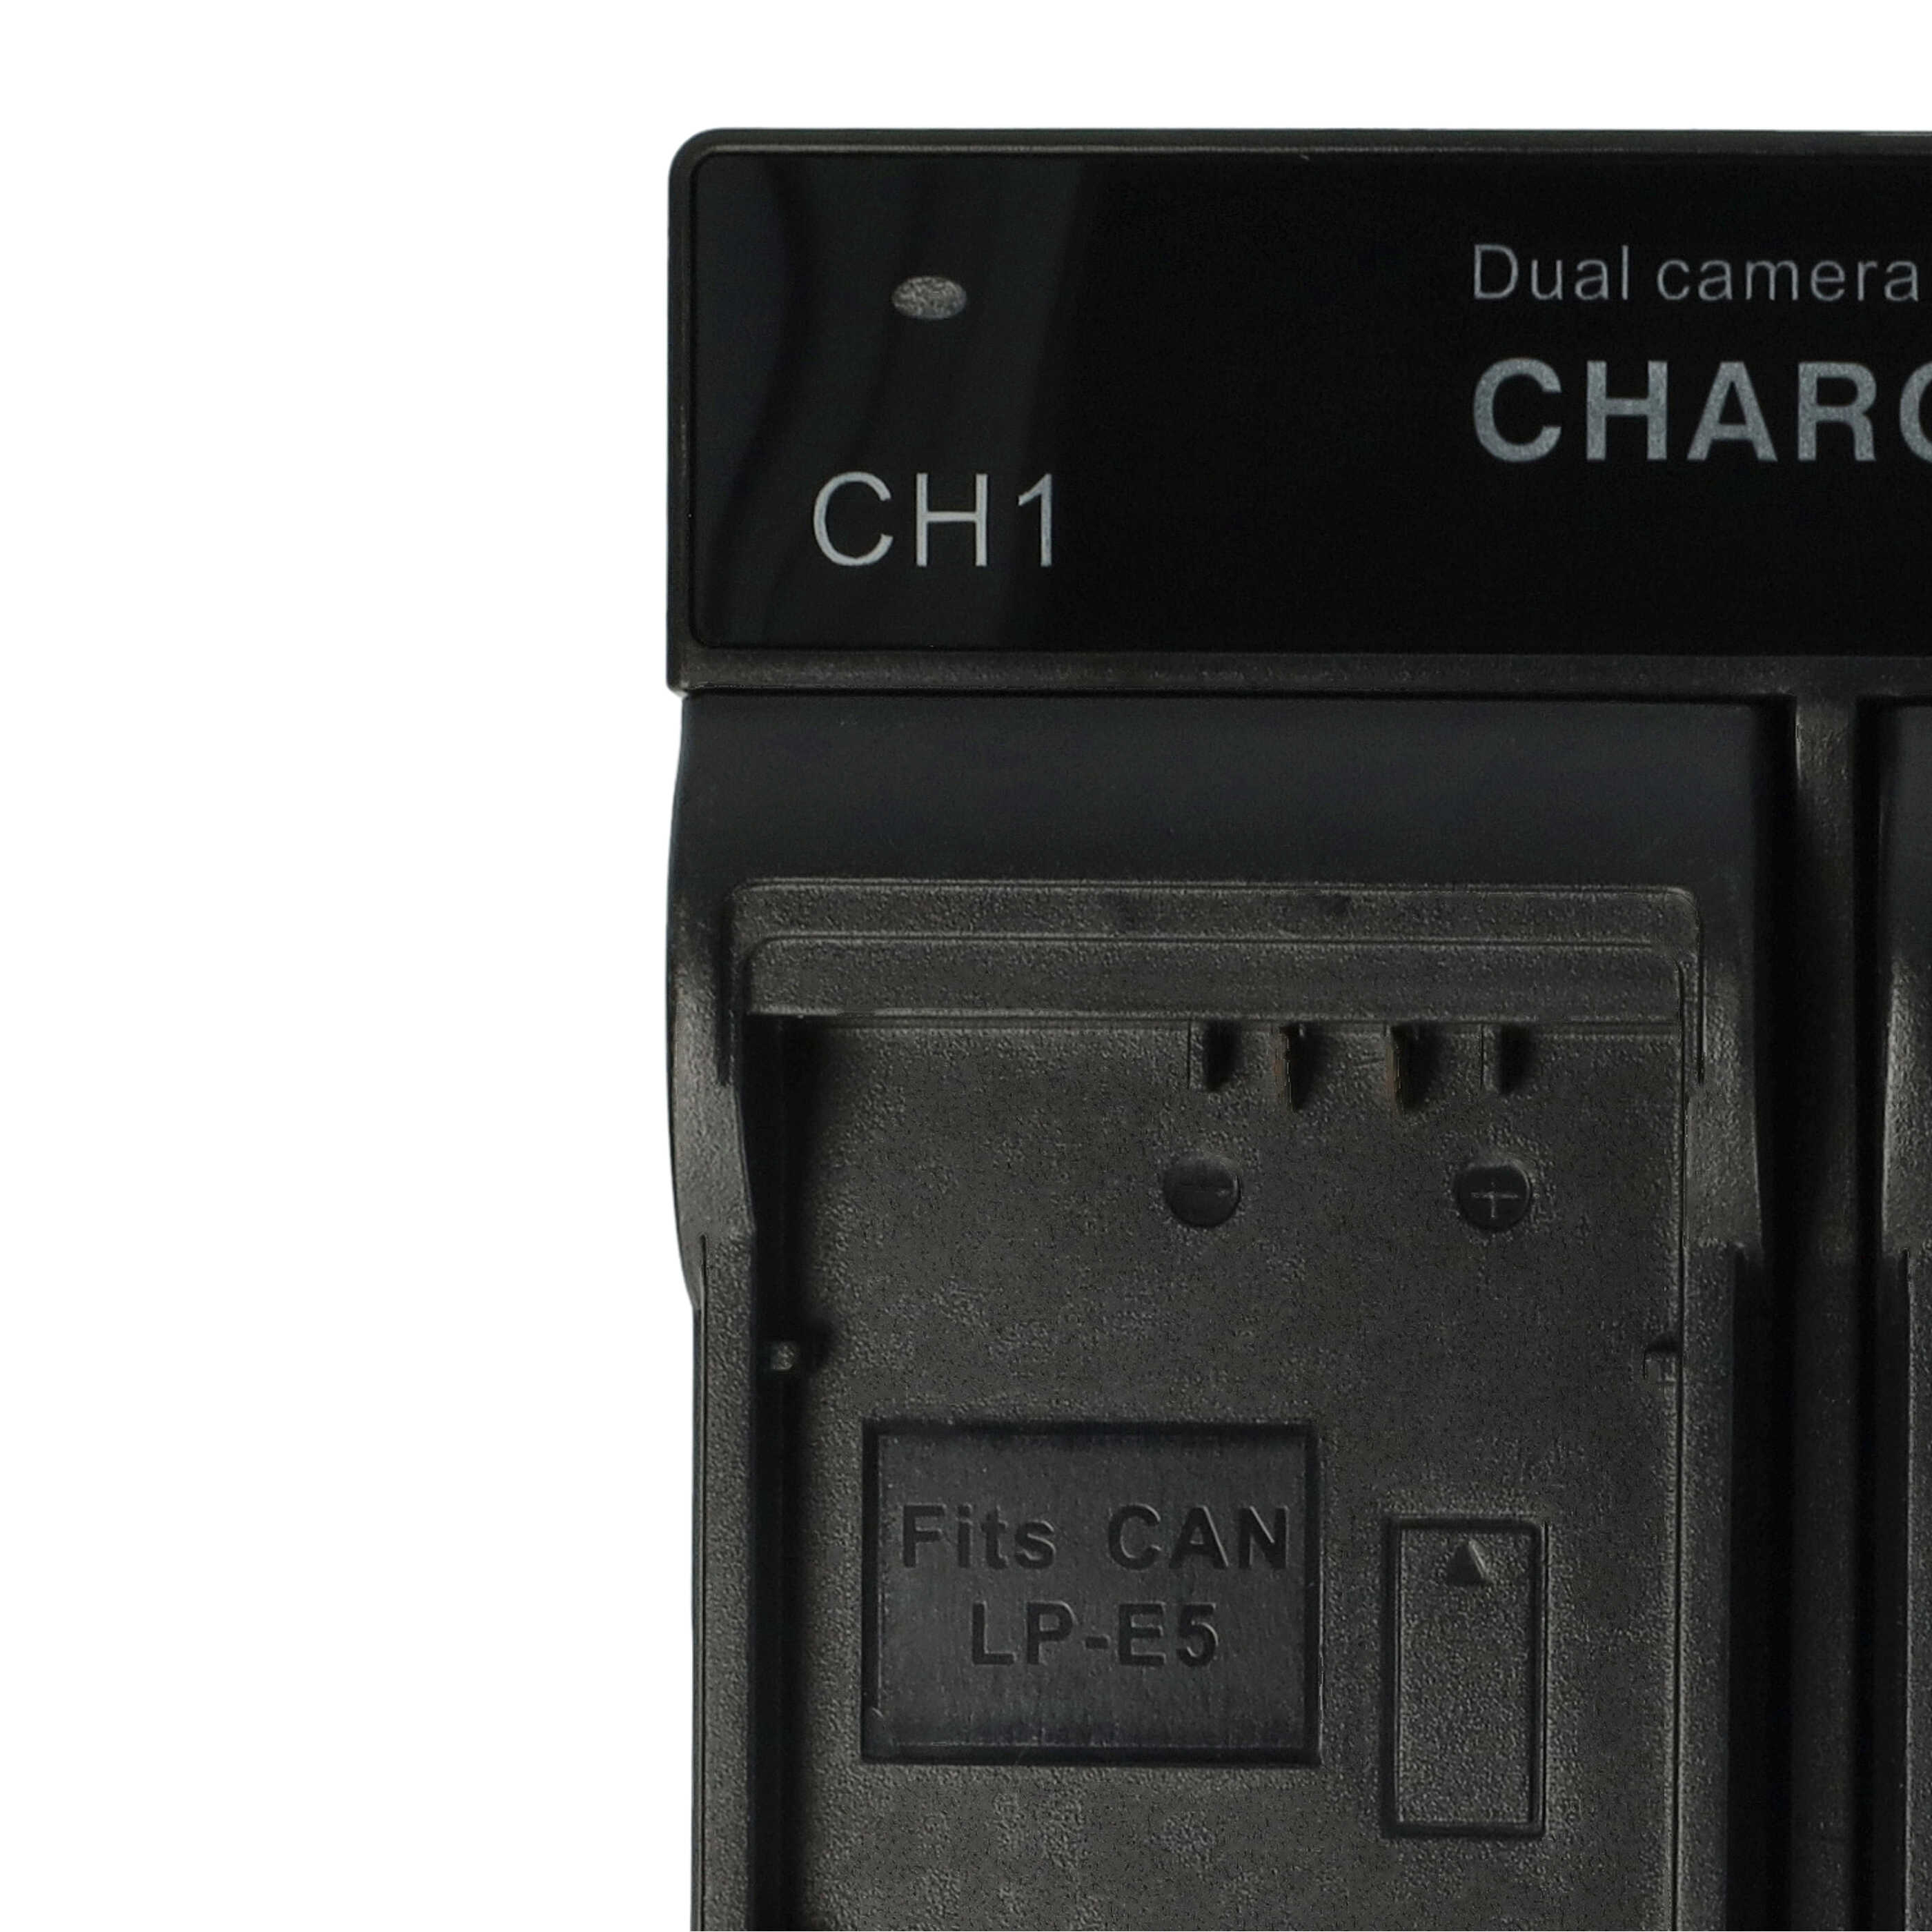 Battery Charger suitable for Samsung BP-85ST Camera etc. - 0.5 / 0.9 A, 4.2/8.4 V